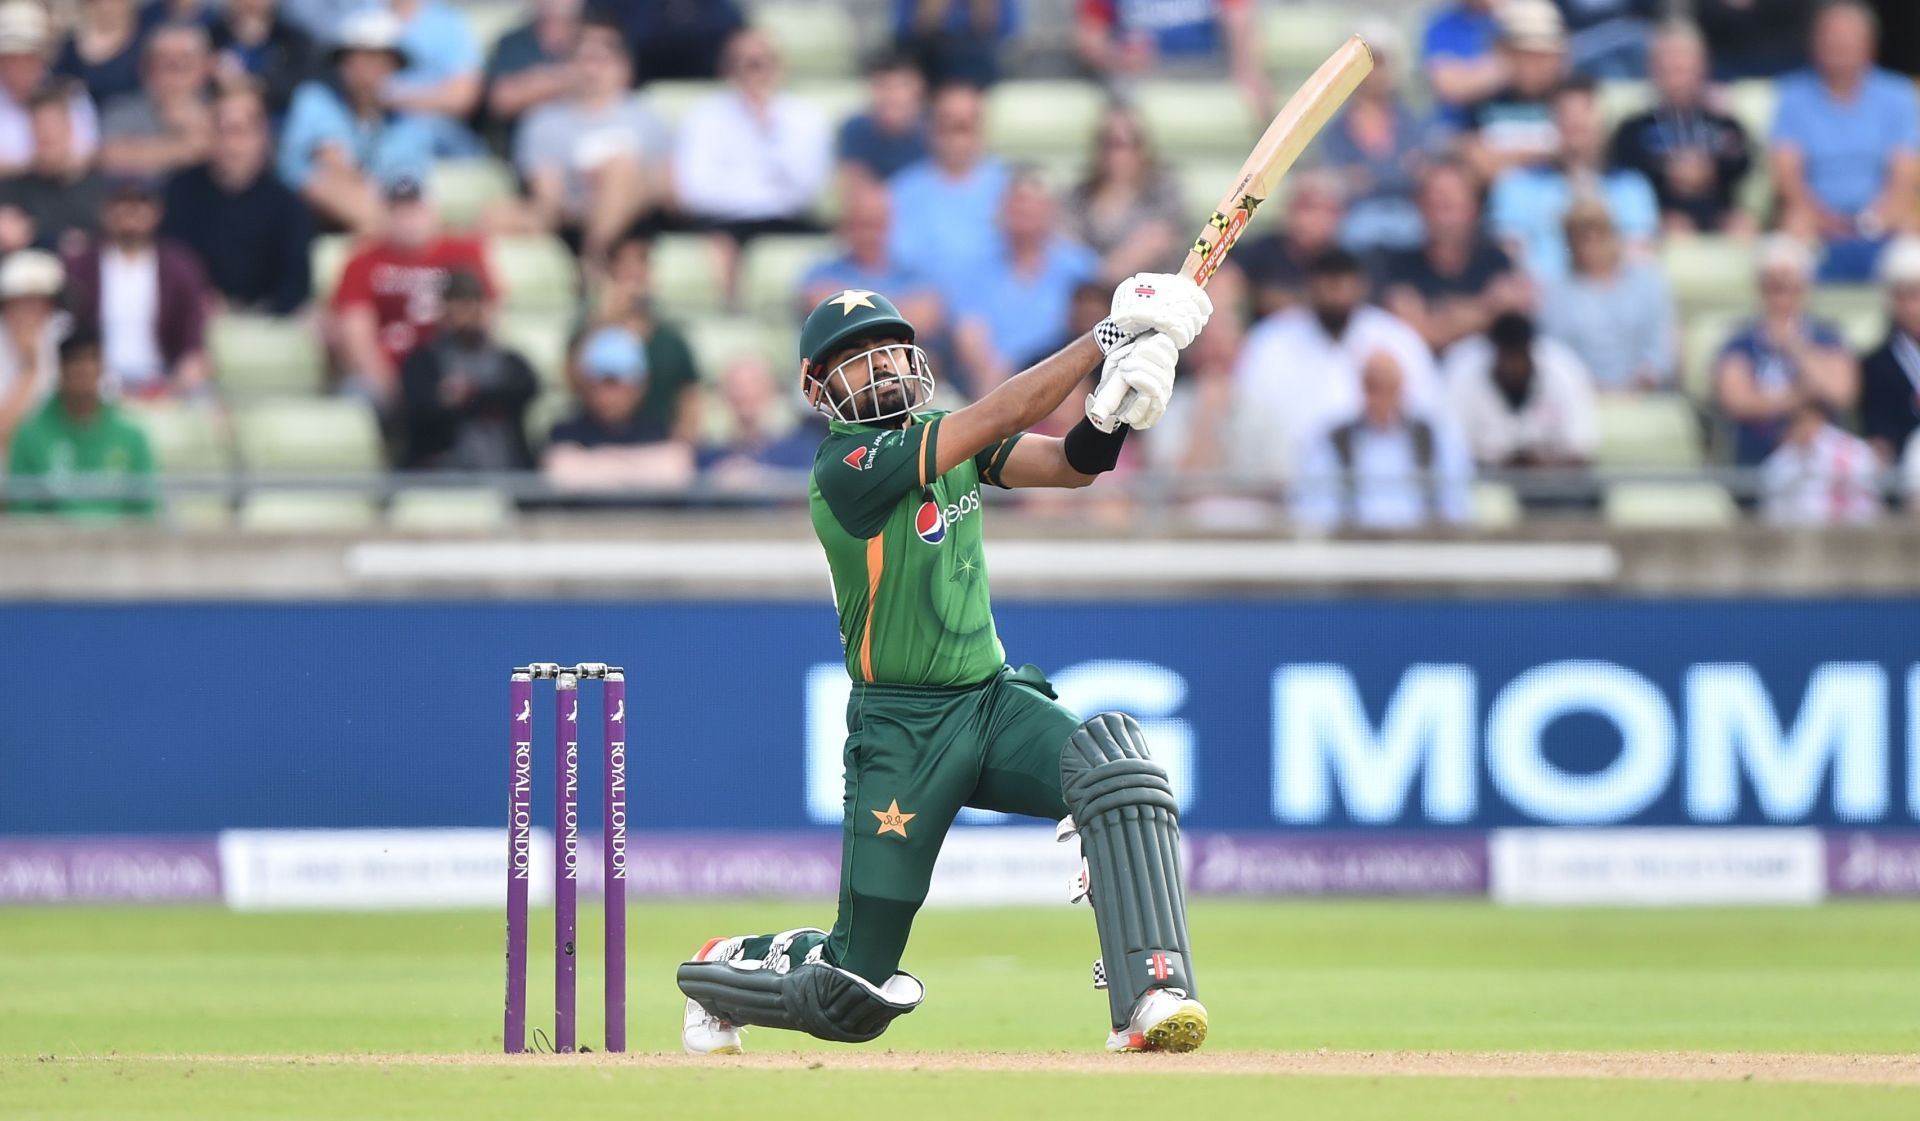 Babar Azam during the 3rd ODI against England. Pic: Getty Images